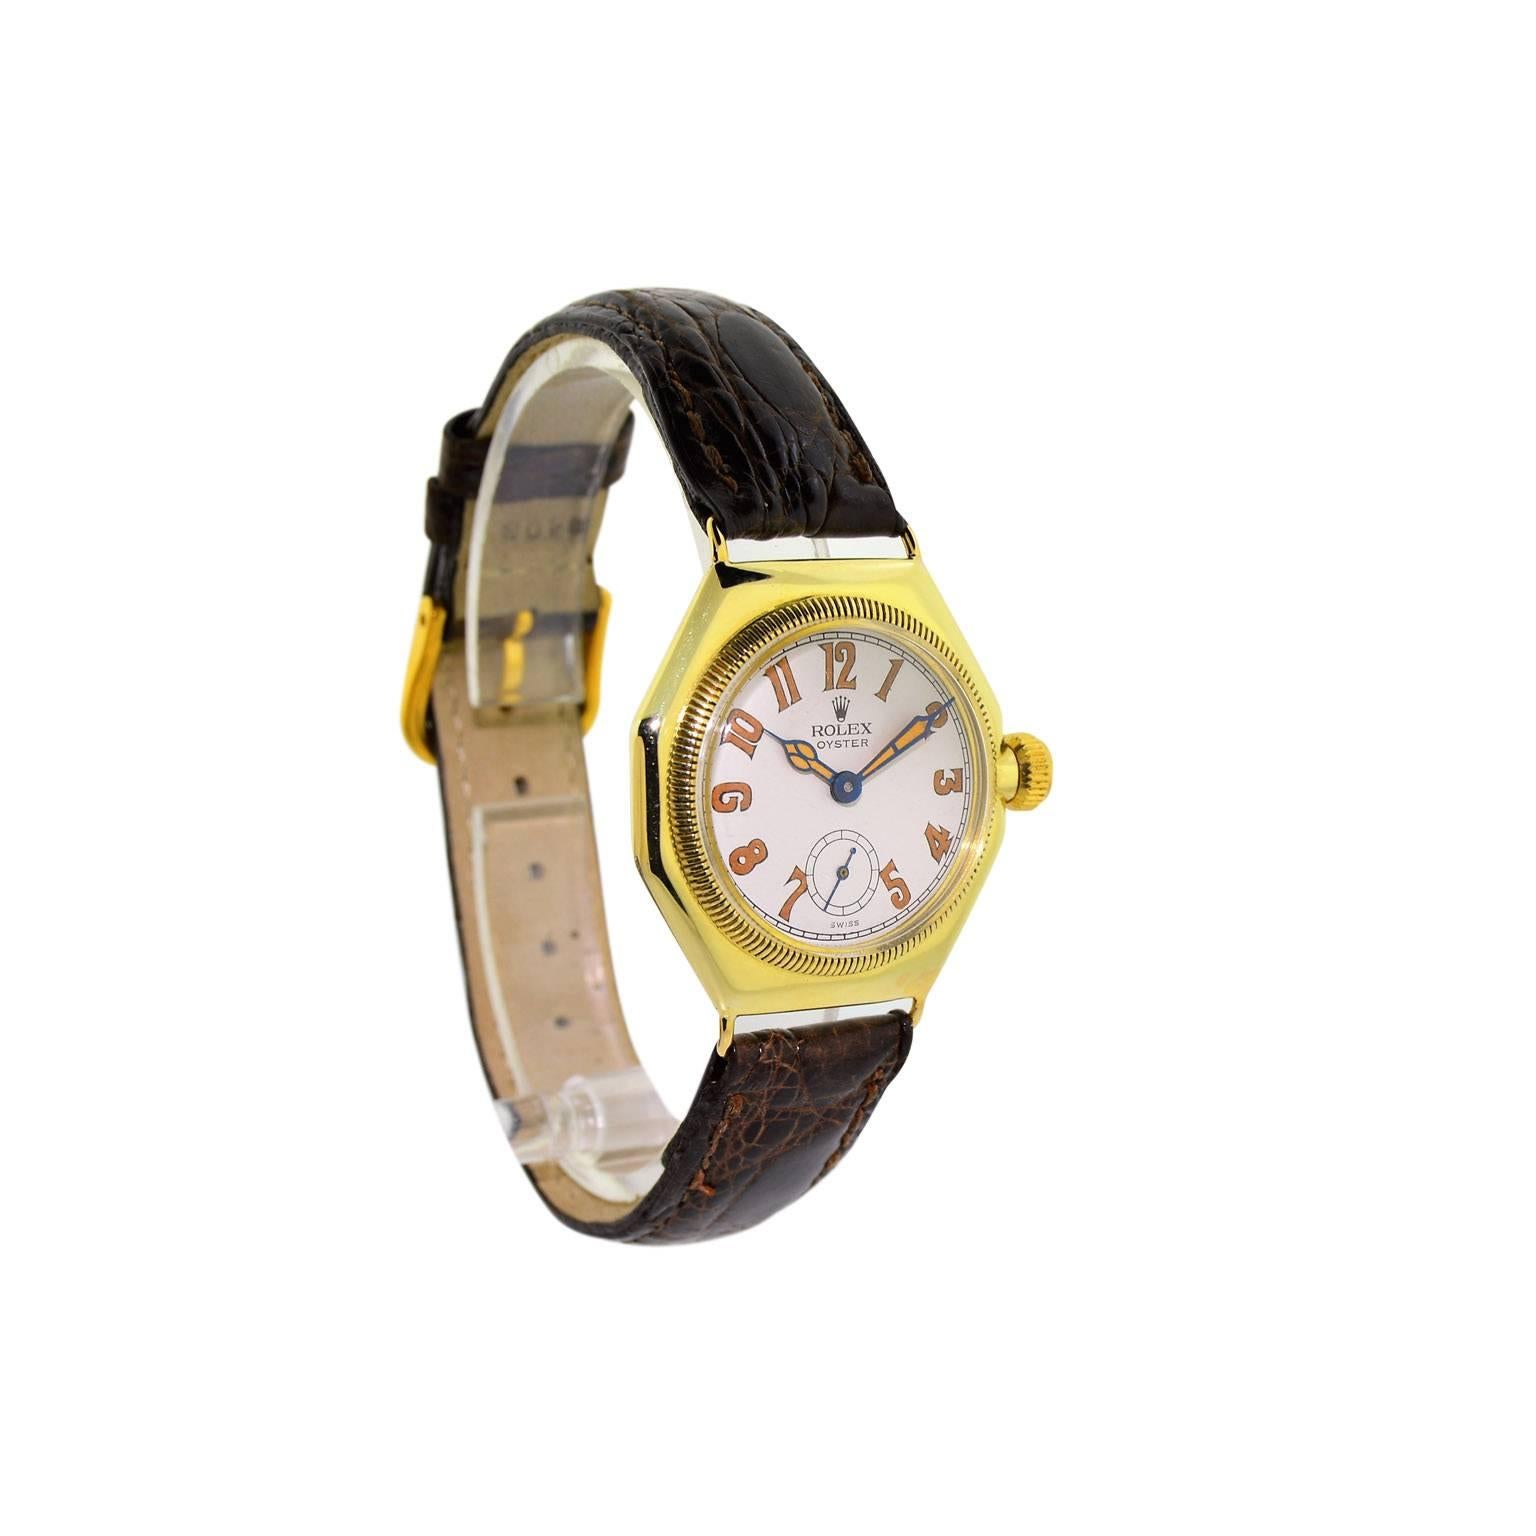 FACTORY / HOUSE: Rolex Watch Company
STYLE / REFERENCE: Oyster Octagon / English Patents
METAL / MATERIAL: 14Kt Solid Yellow Gold
DIMENSIONS: 40mm X 32mm
CIRCA: 1935 / 1936
MOVEMENT / CALIBER:  Manual Winding /  15 Jewels / Adjusted to six positions